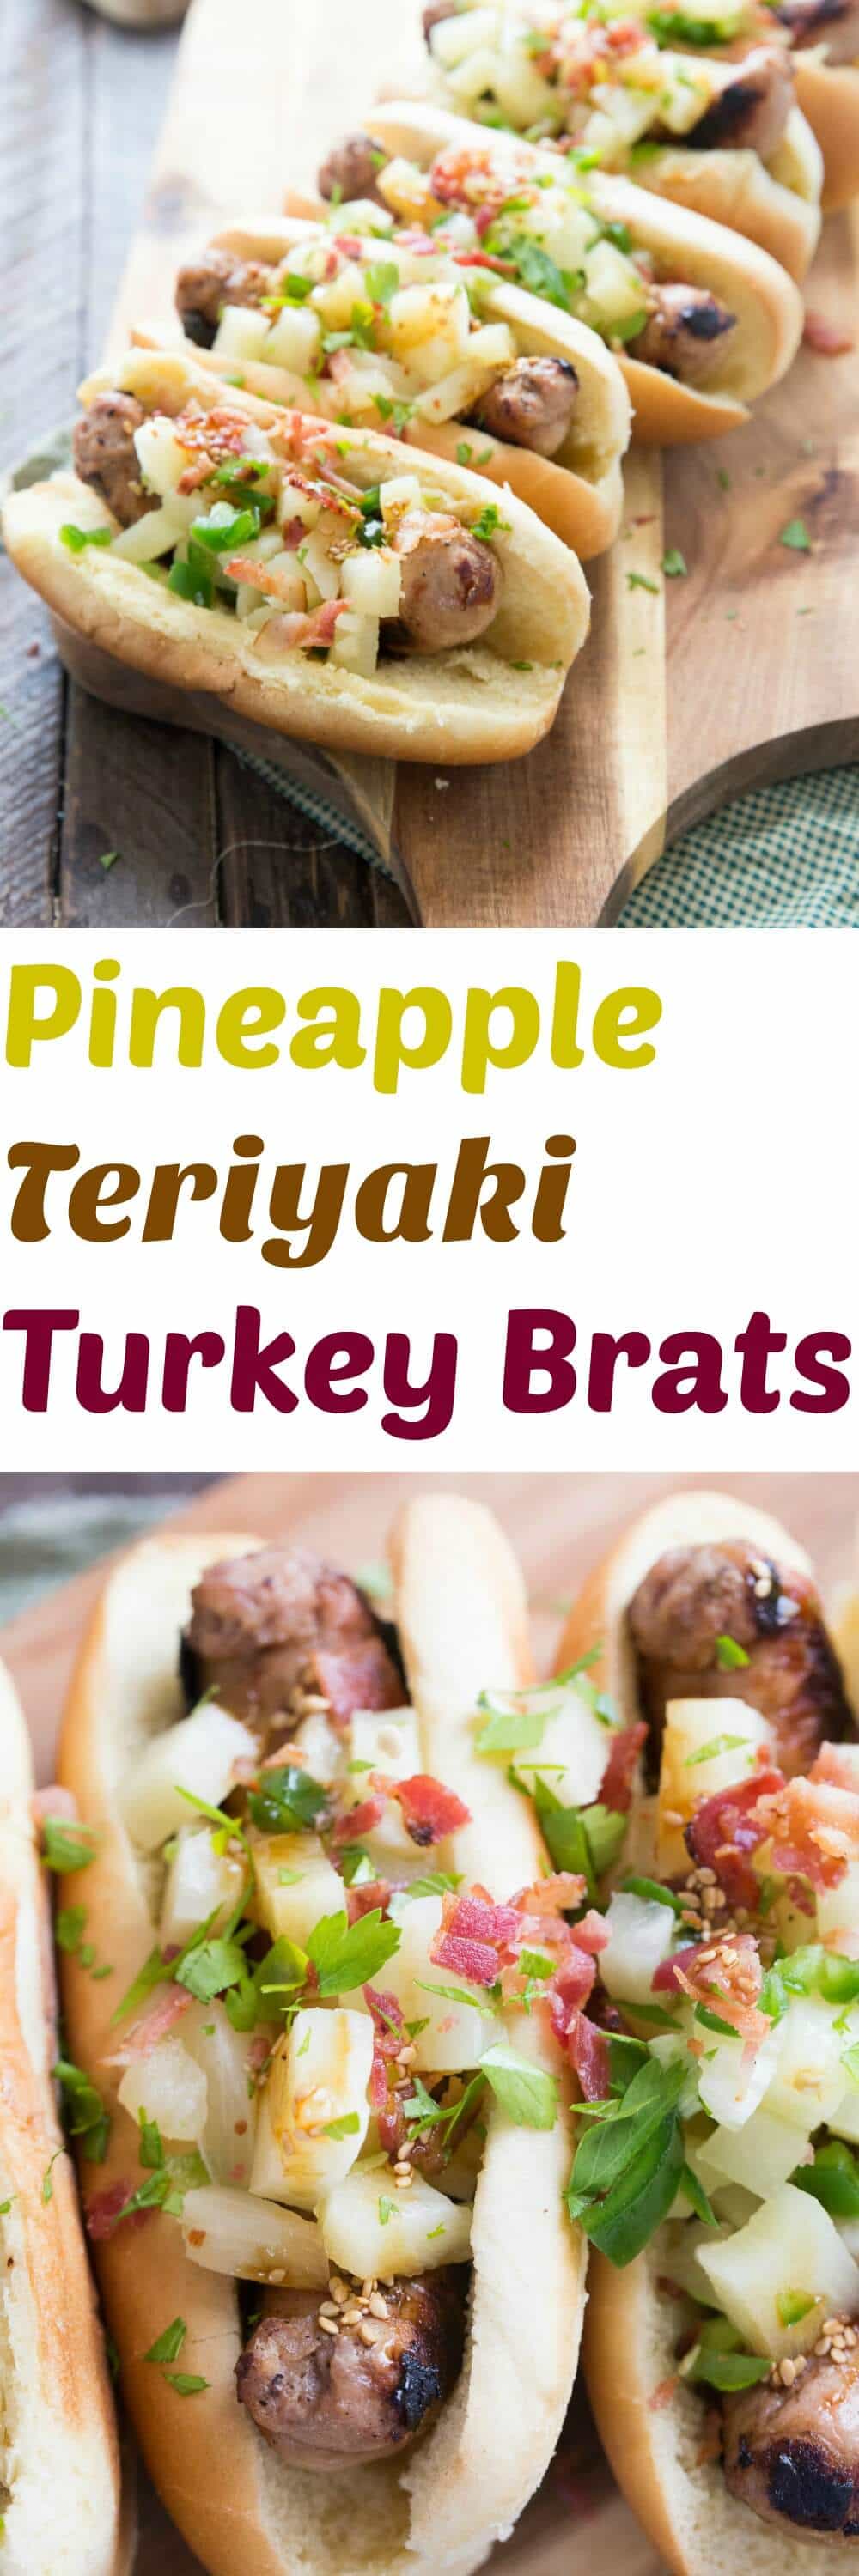 Summer is here with these easy pineapple Teriyaki turkey brats! These brats are topped with fresh pineapple and jalapenos as well as a homemade Teriyaki sauce! The flavors are fresh, spicy and sweet! lemonsforlulu.com